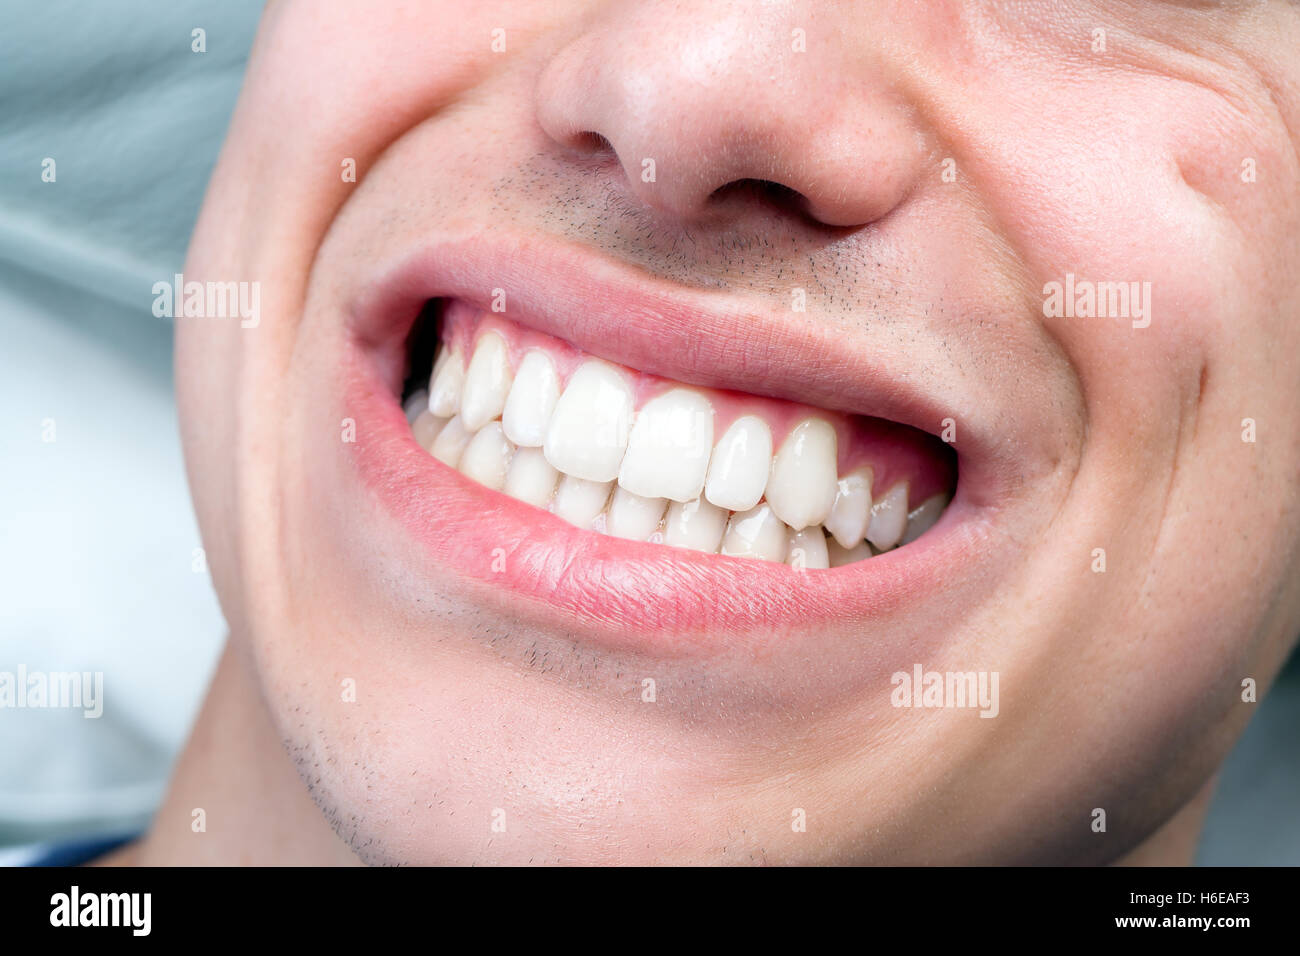 Macro close up of human male mouth showing perfect white teeth. Stock Photo